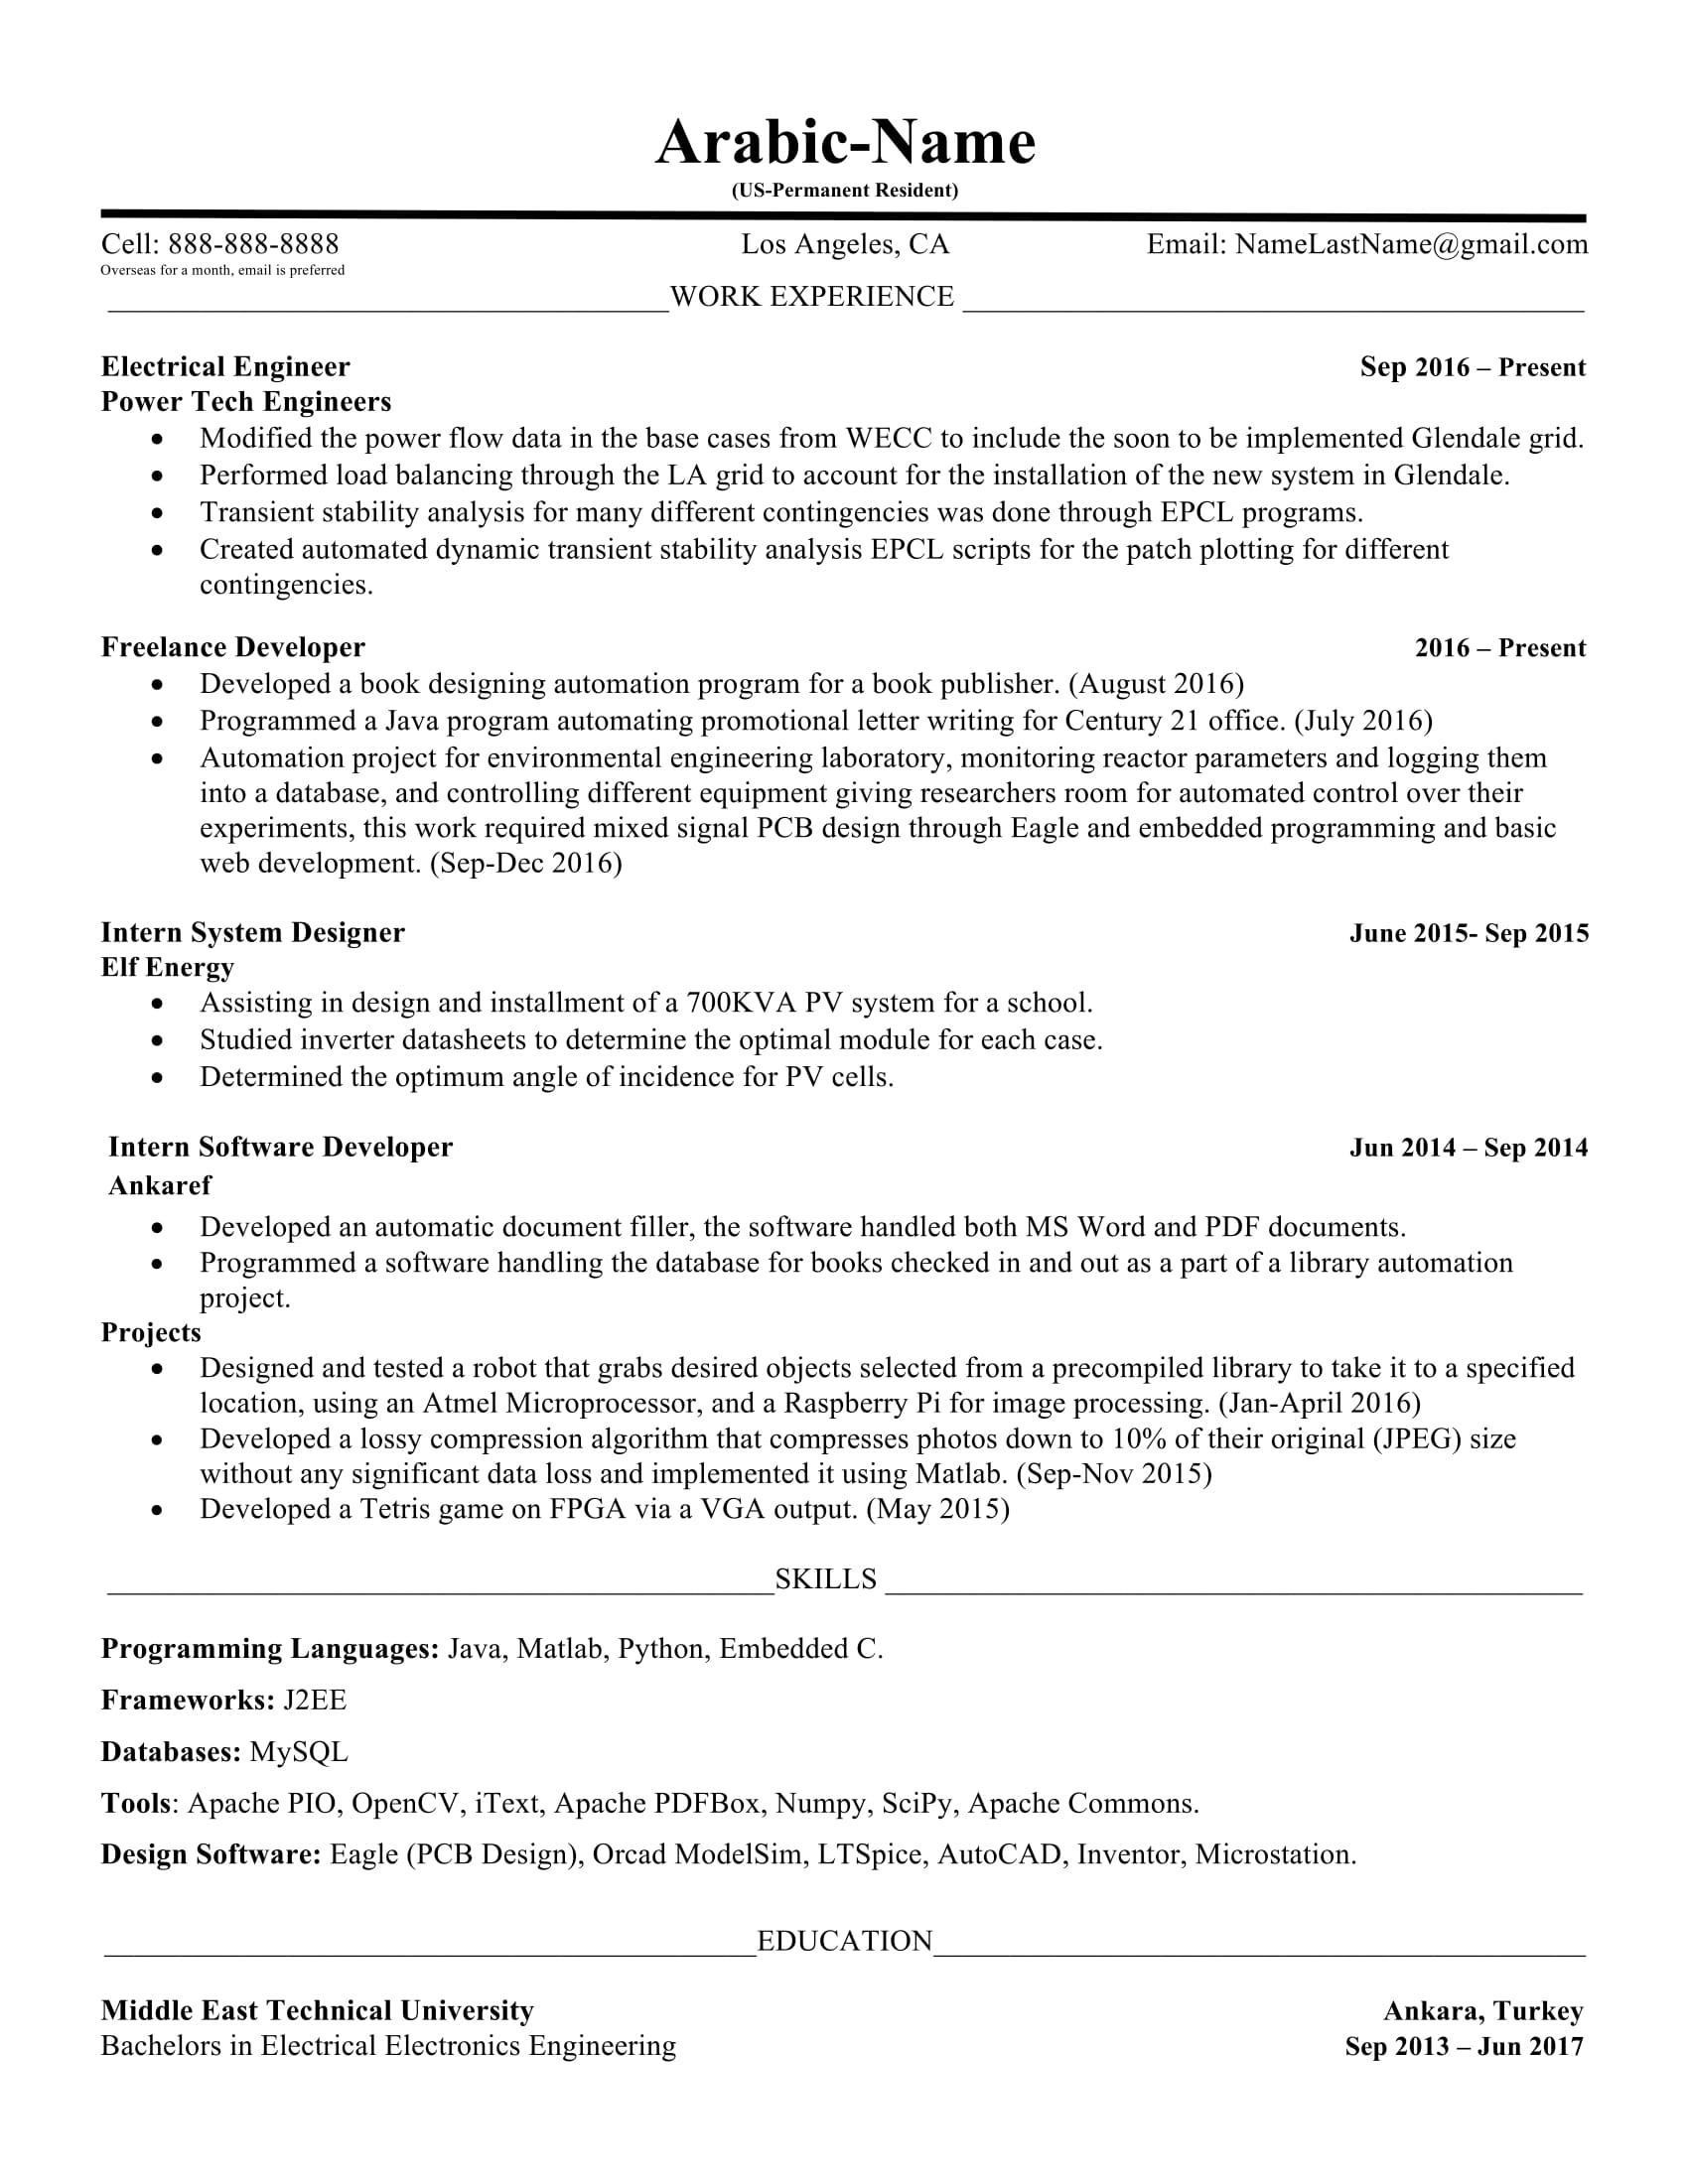 Resume Objective Example Senior Engineer Electrical Resume Objective Example Free Unique Wallpapers Engineering Student Template Chemical Embedded Medical Assistant Format Word Entry Level resume objective example|wikiresume.com